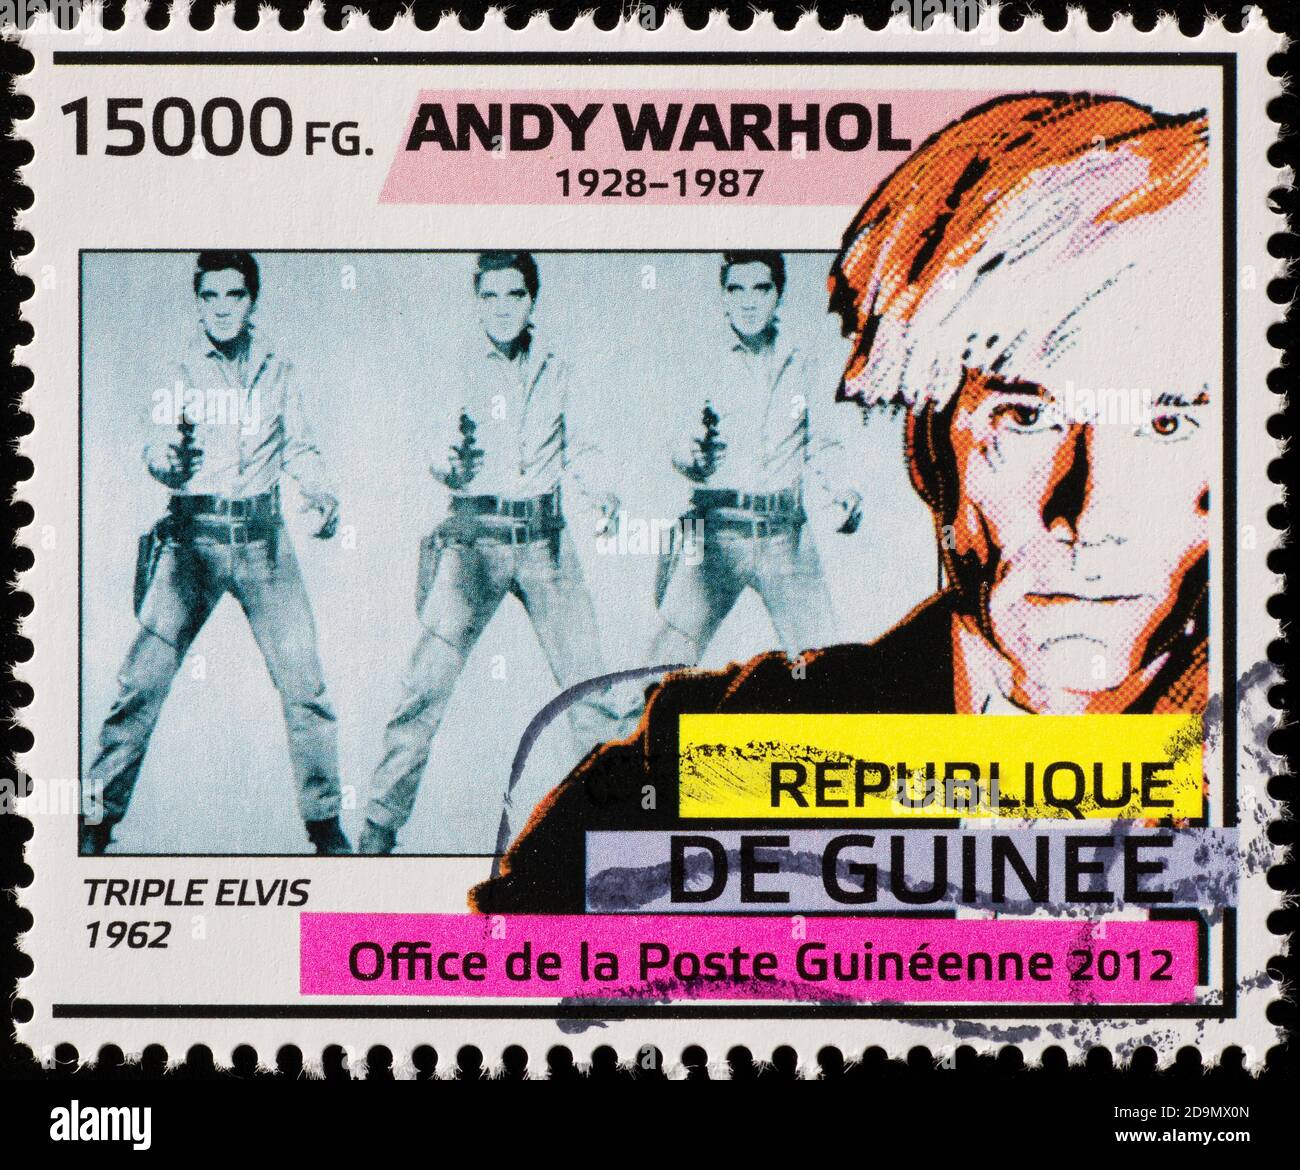 Portraits of Elvis Presley and Andy Warhol on stamp Stock Photo